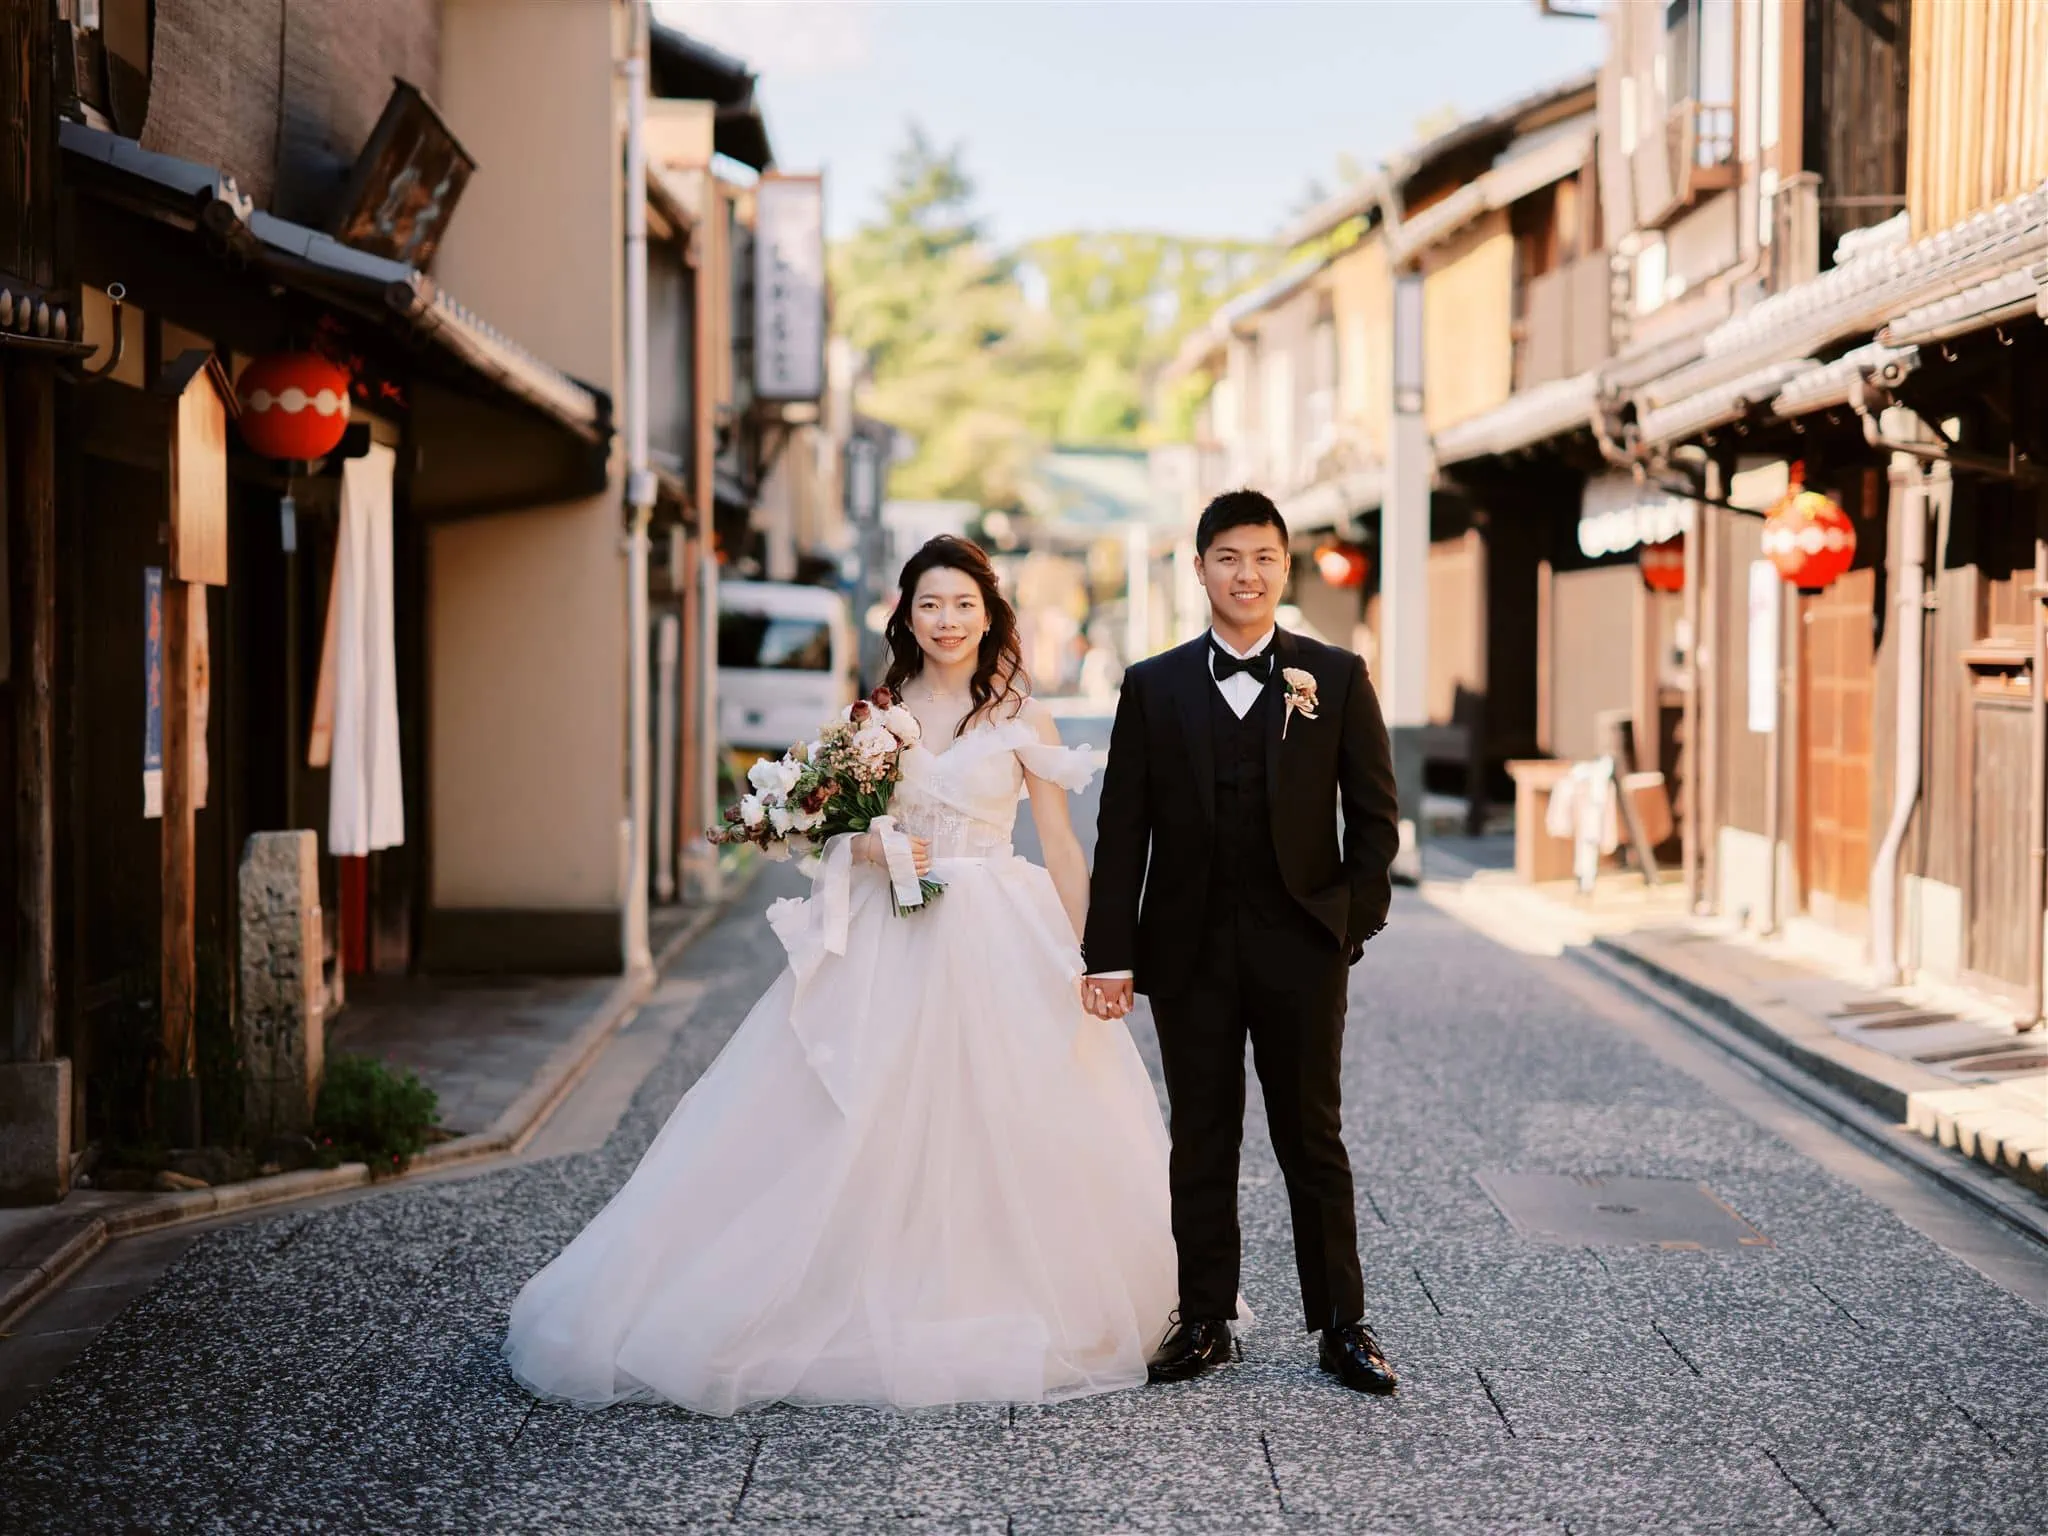 Kyoto Tokyo Japan Elopement Wedding Photographer, Planner & Videographer | A newlywed couple standing in a narrow alleyway, showcasing the latest wedding trends.